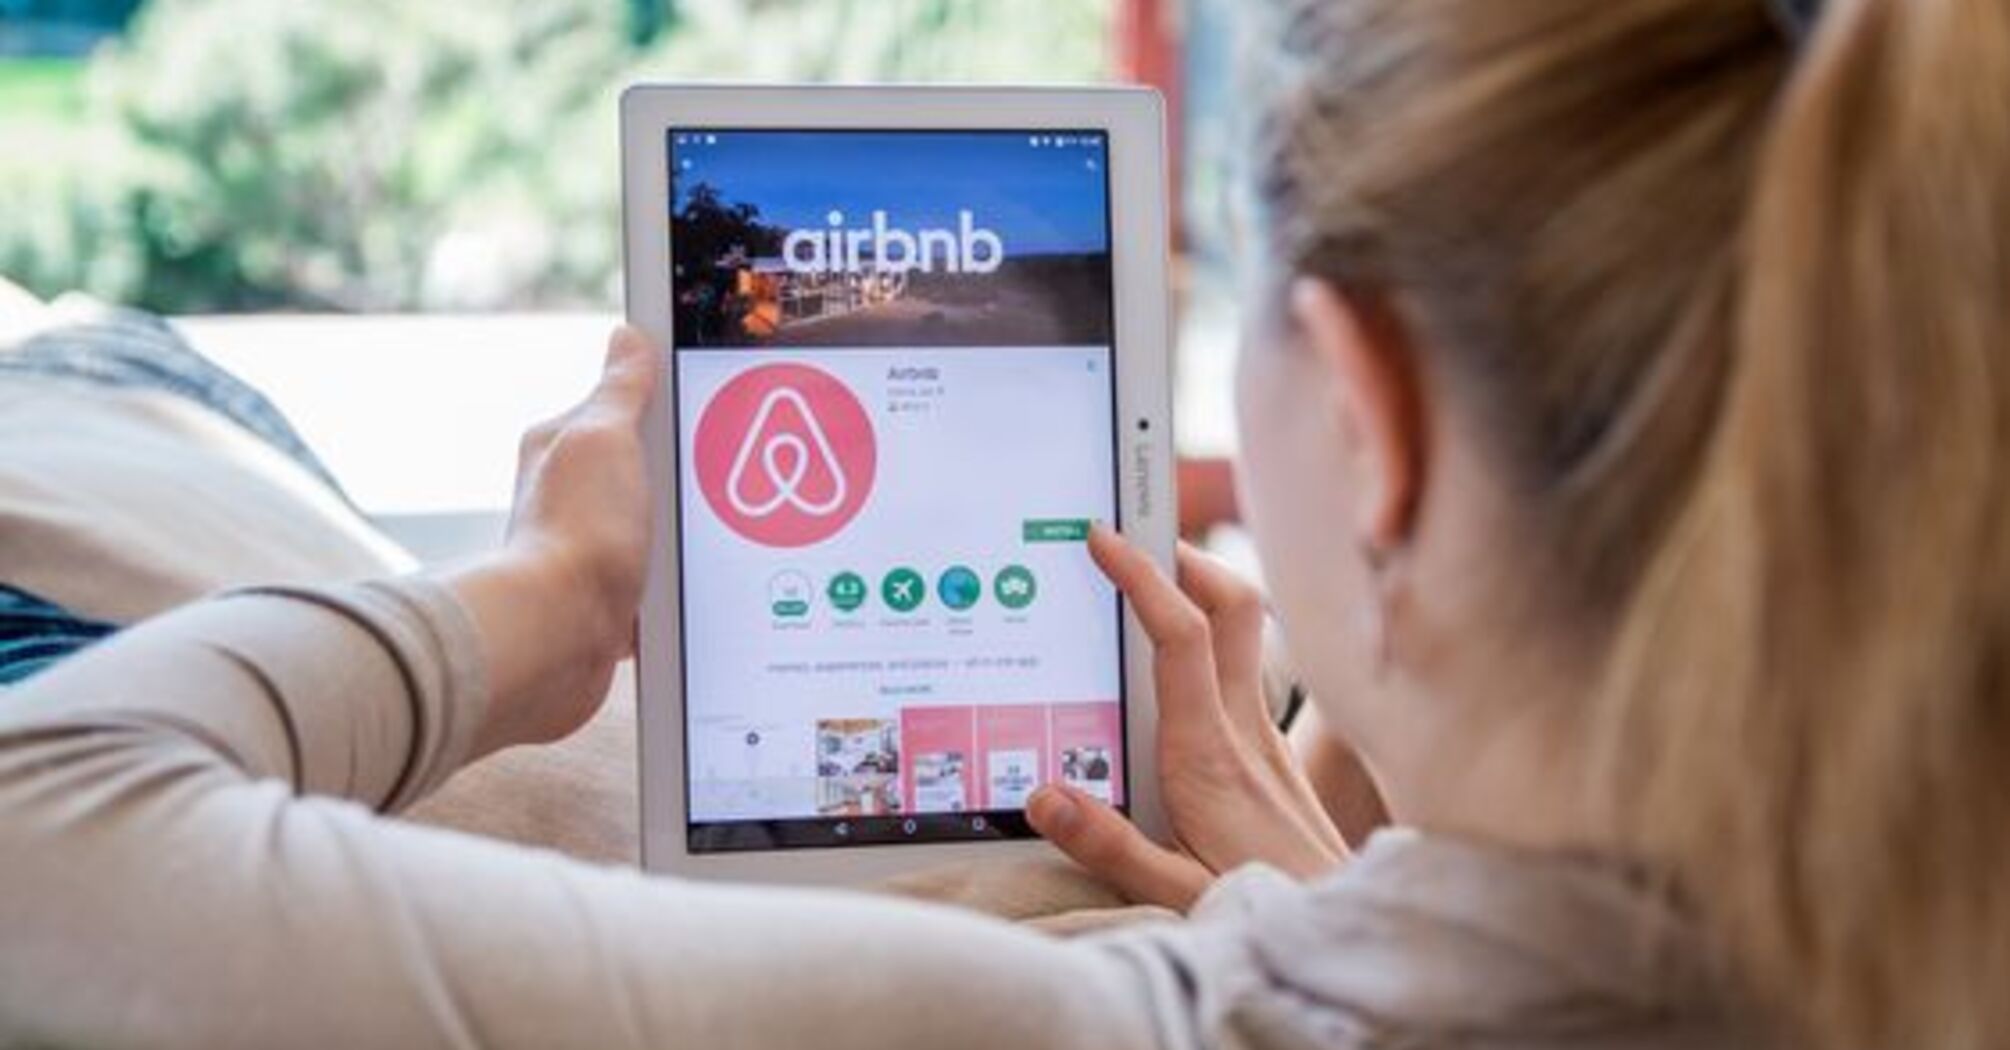 In the United States, a scammer defrauded tourists out of $7.5 million through the Airbnb platform